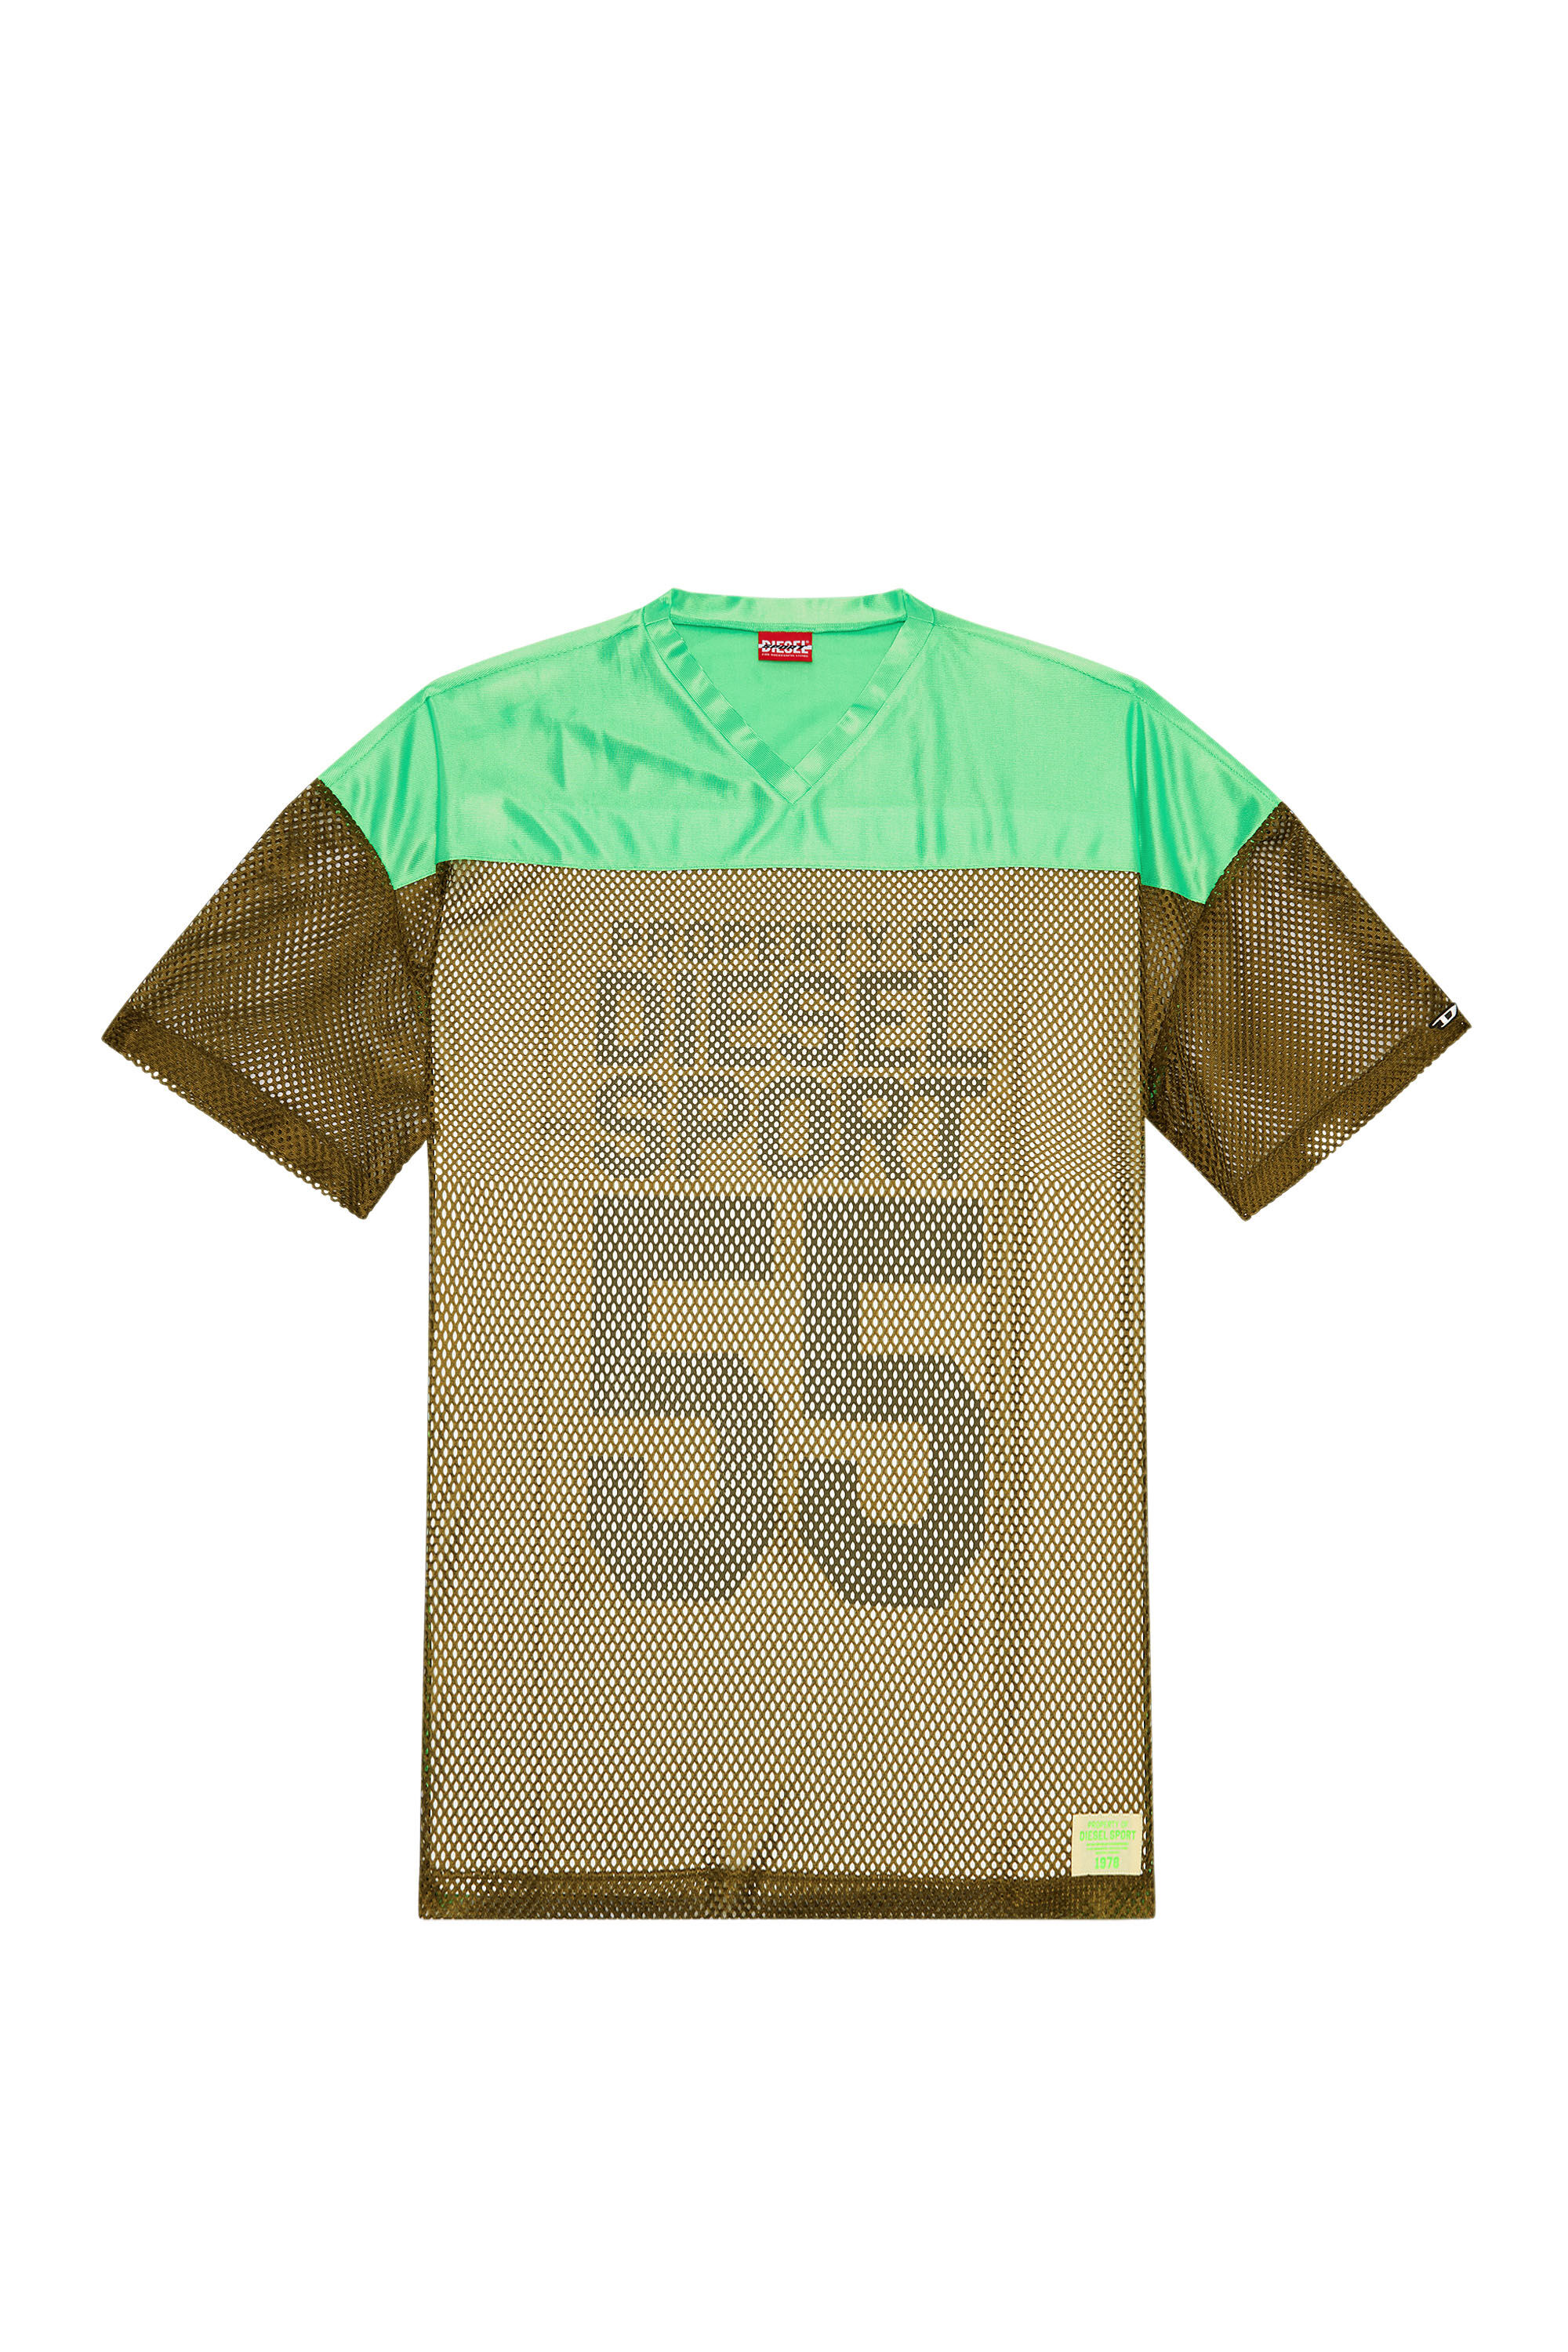 AMTEE-CATHAL-HT03 Man: T-shirt in mesh and dazzle fabric | Diesel